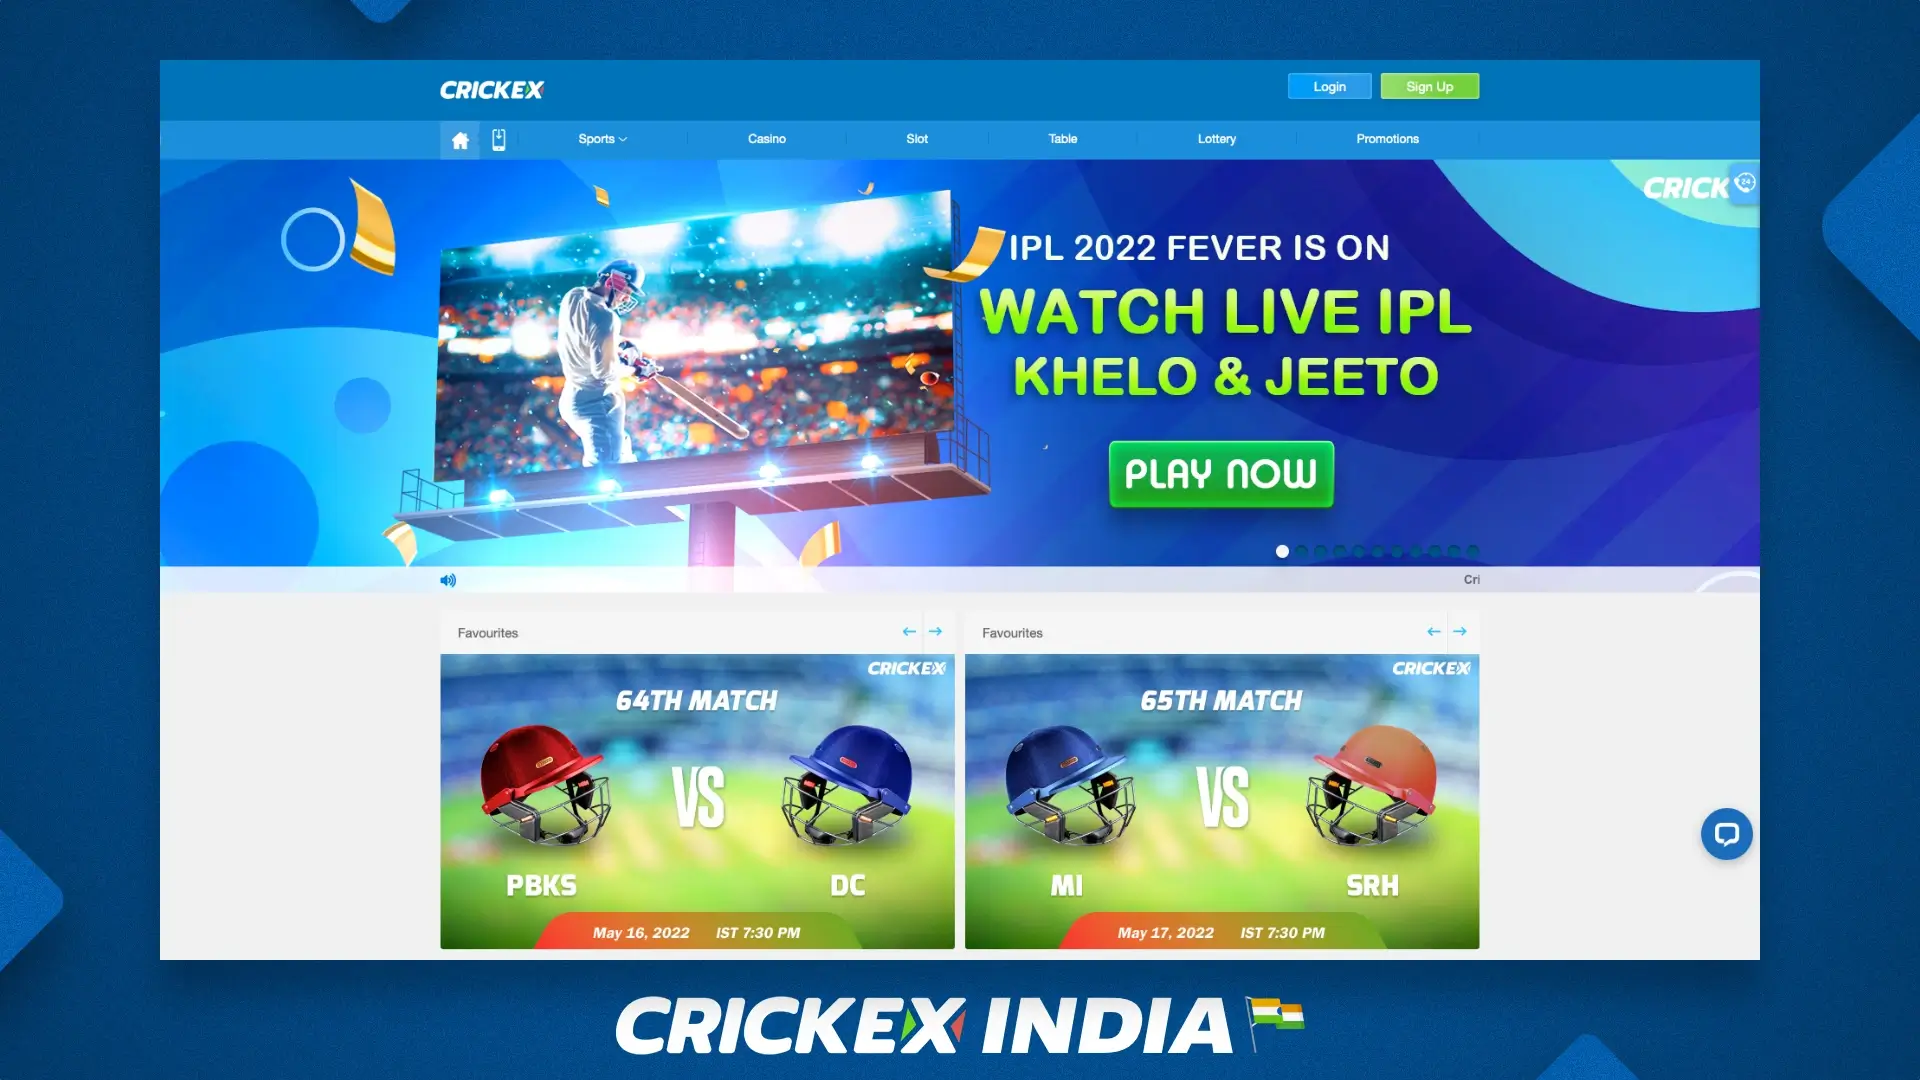 Basic information about the Crickex company in India